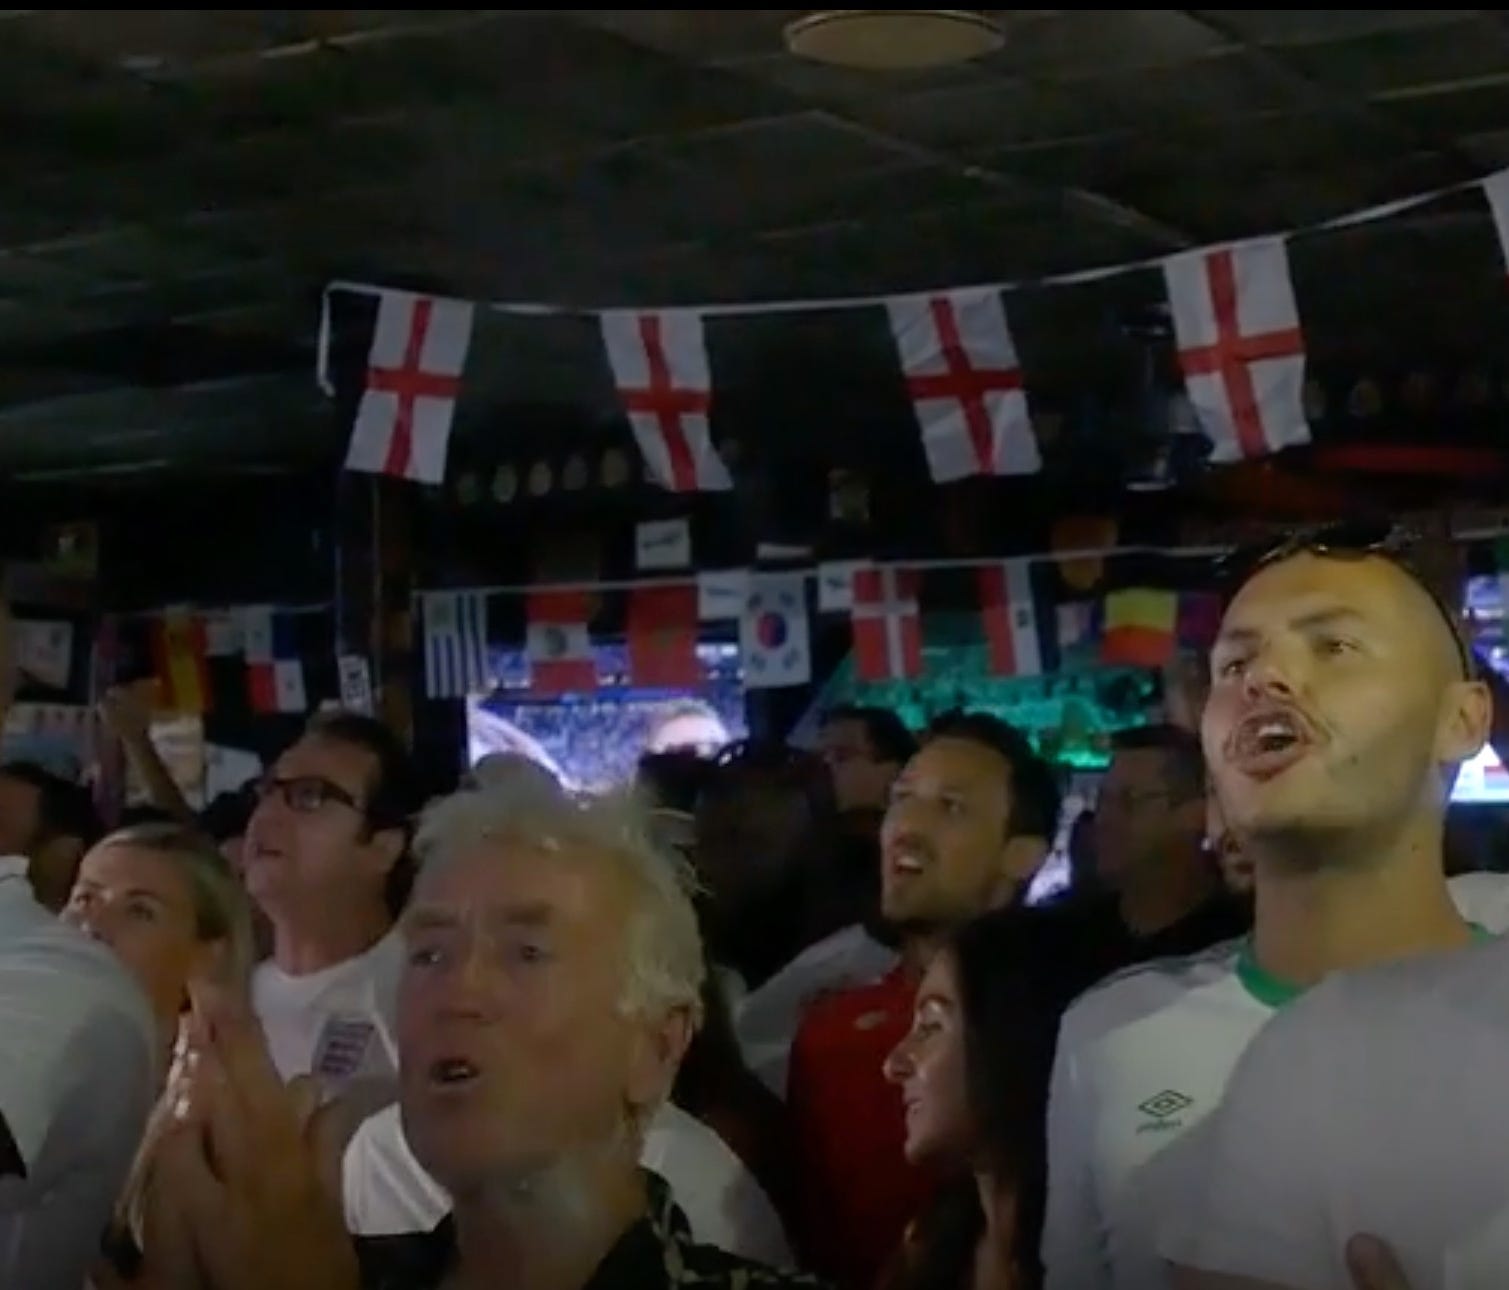 England fans watch the World Cup at Ye Olde King's Head in Santa Monica, Calif. It's about to be a long, sad match for them.